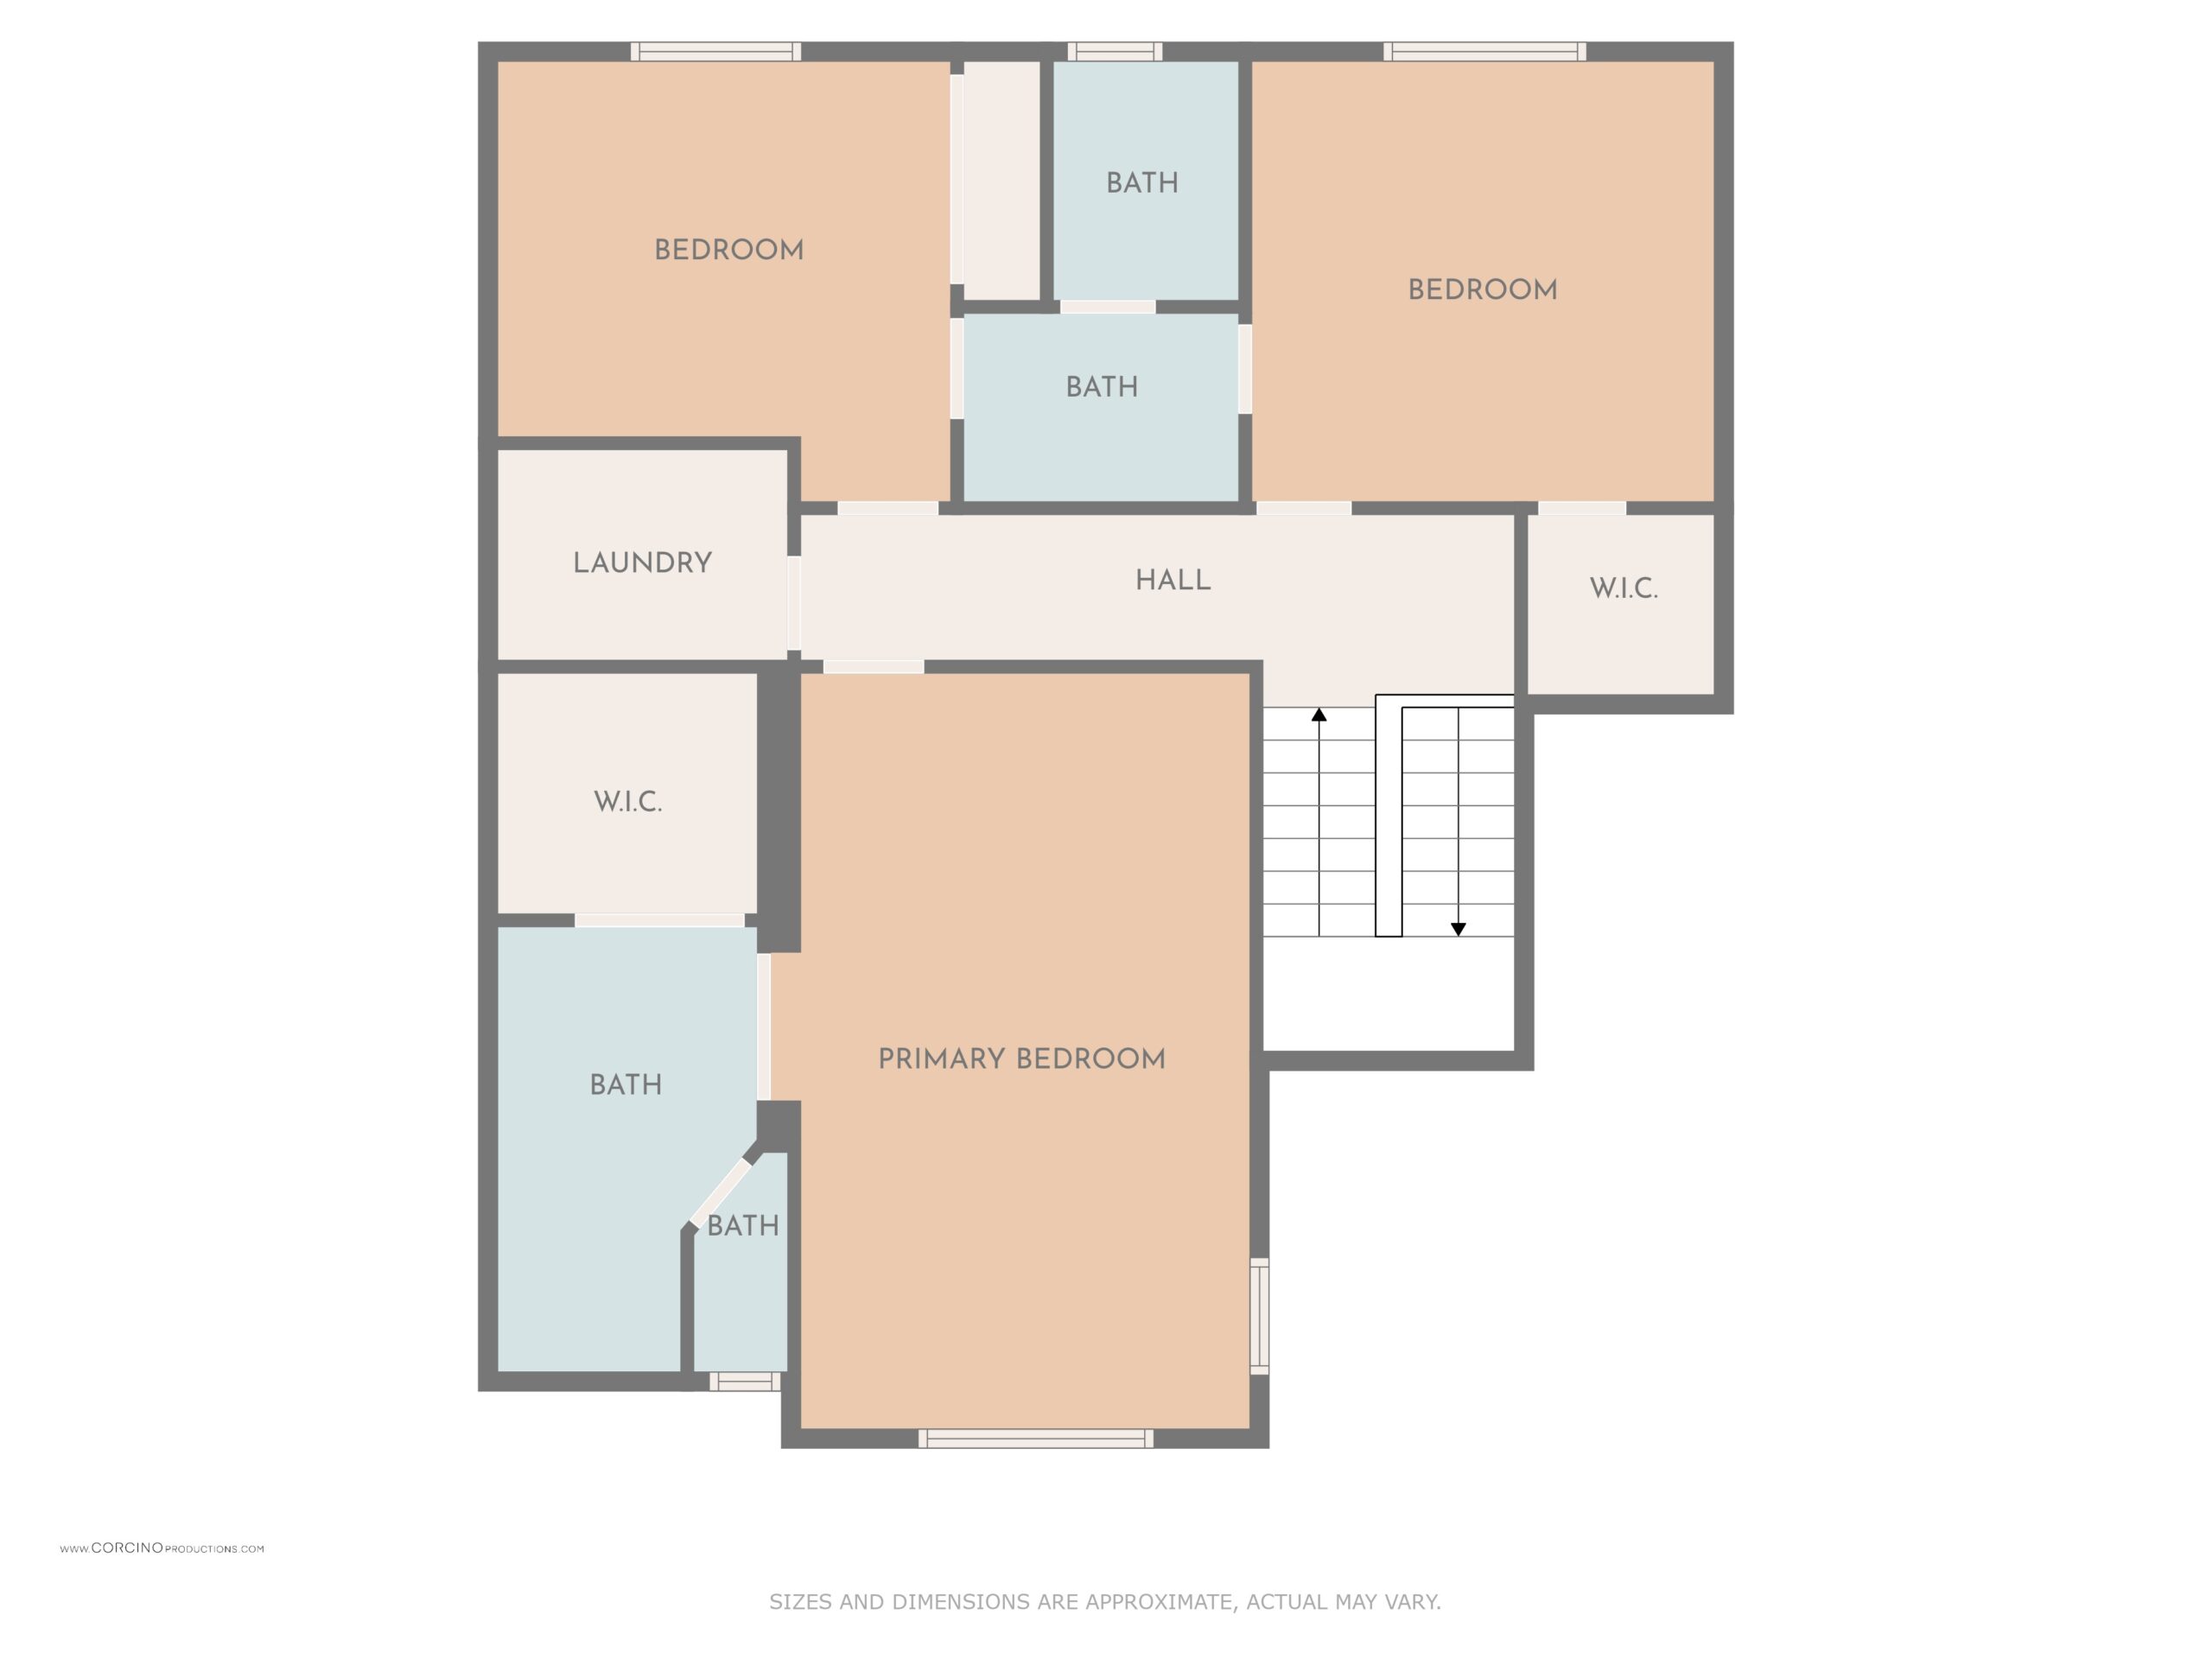 2nd_floor_without-dimensions_350_settlers_road_upland